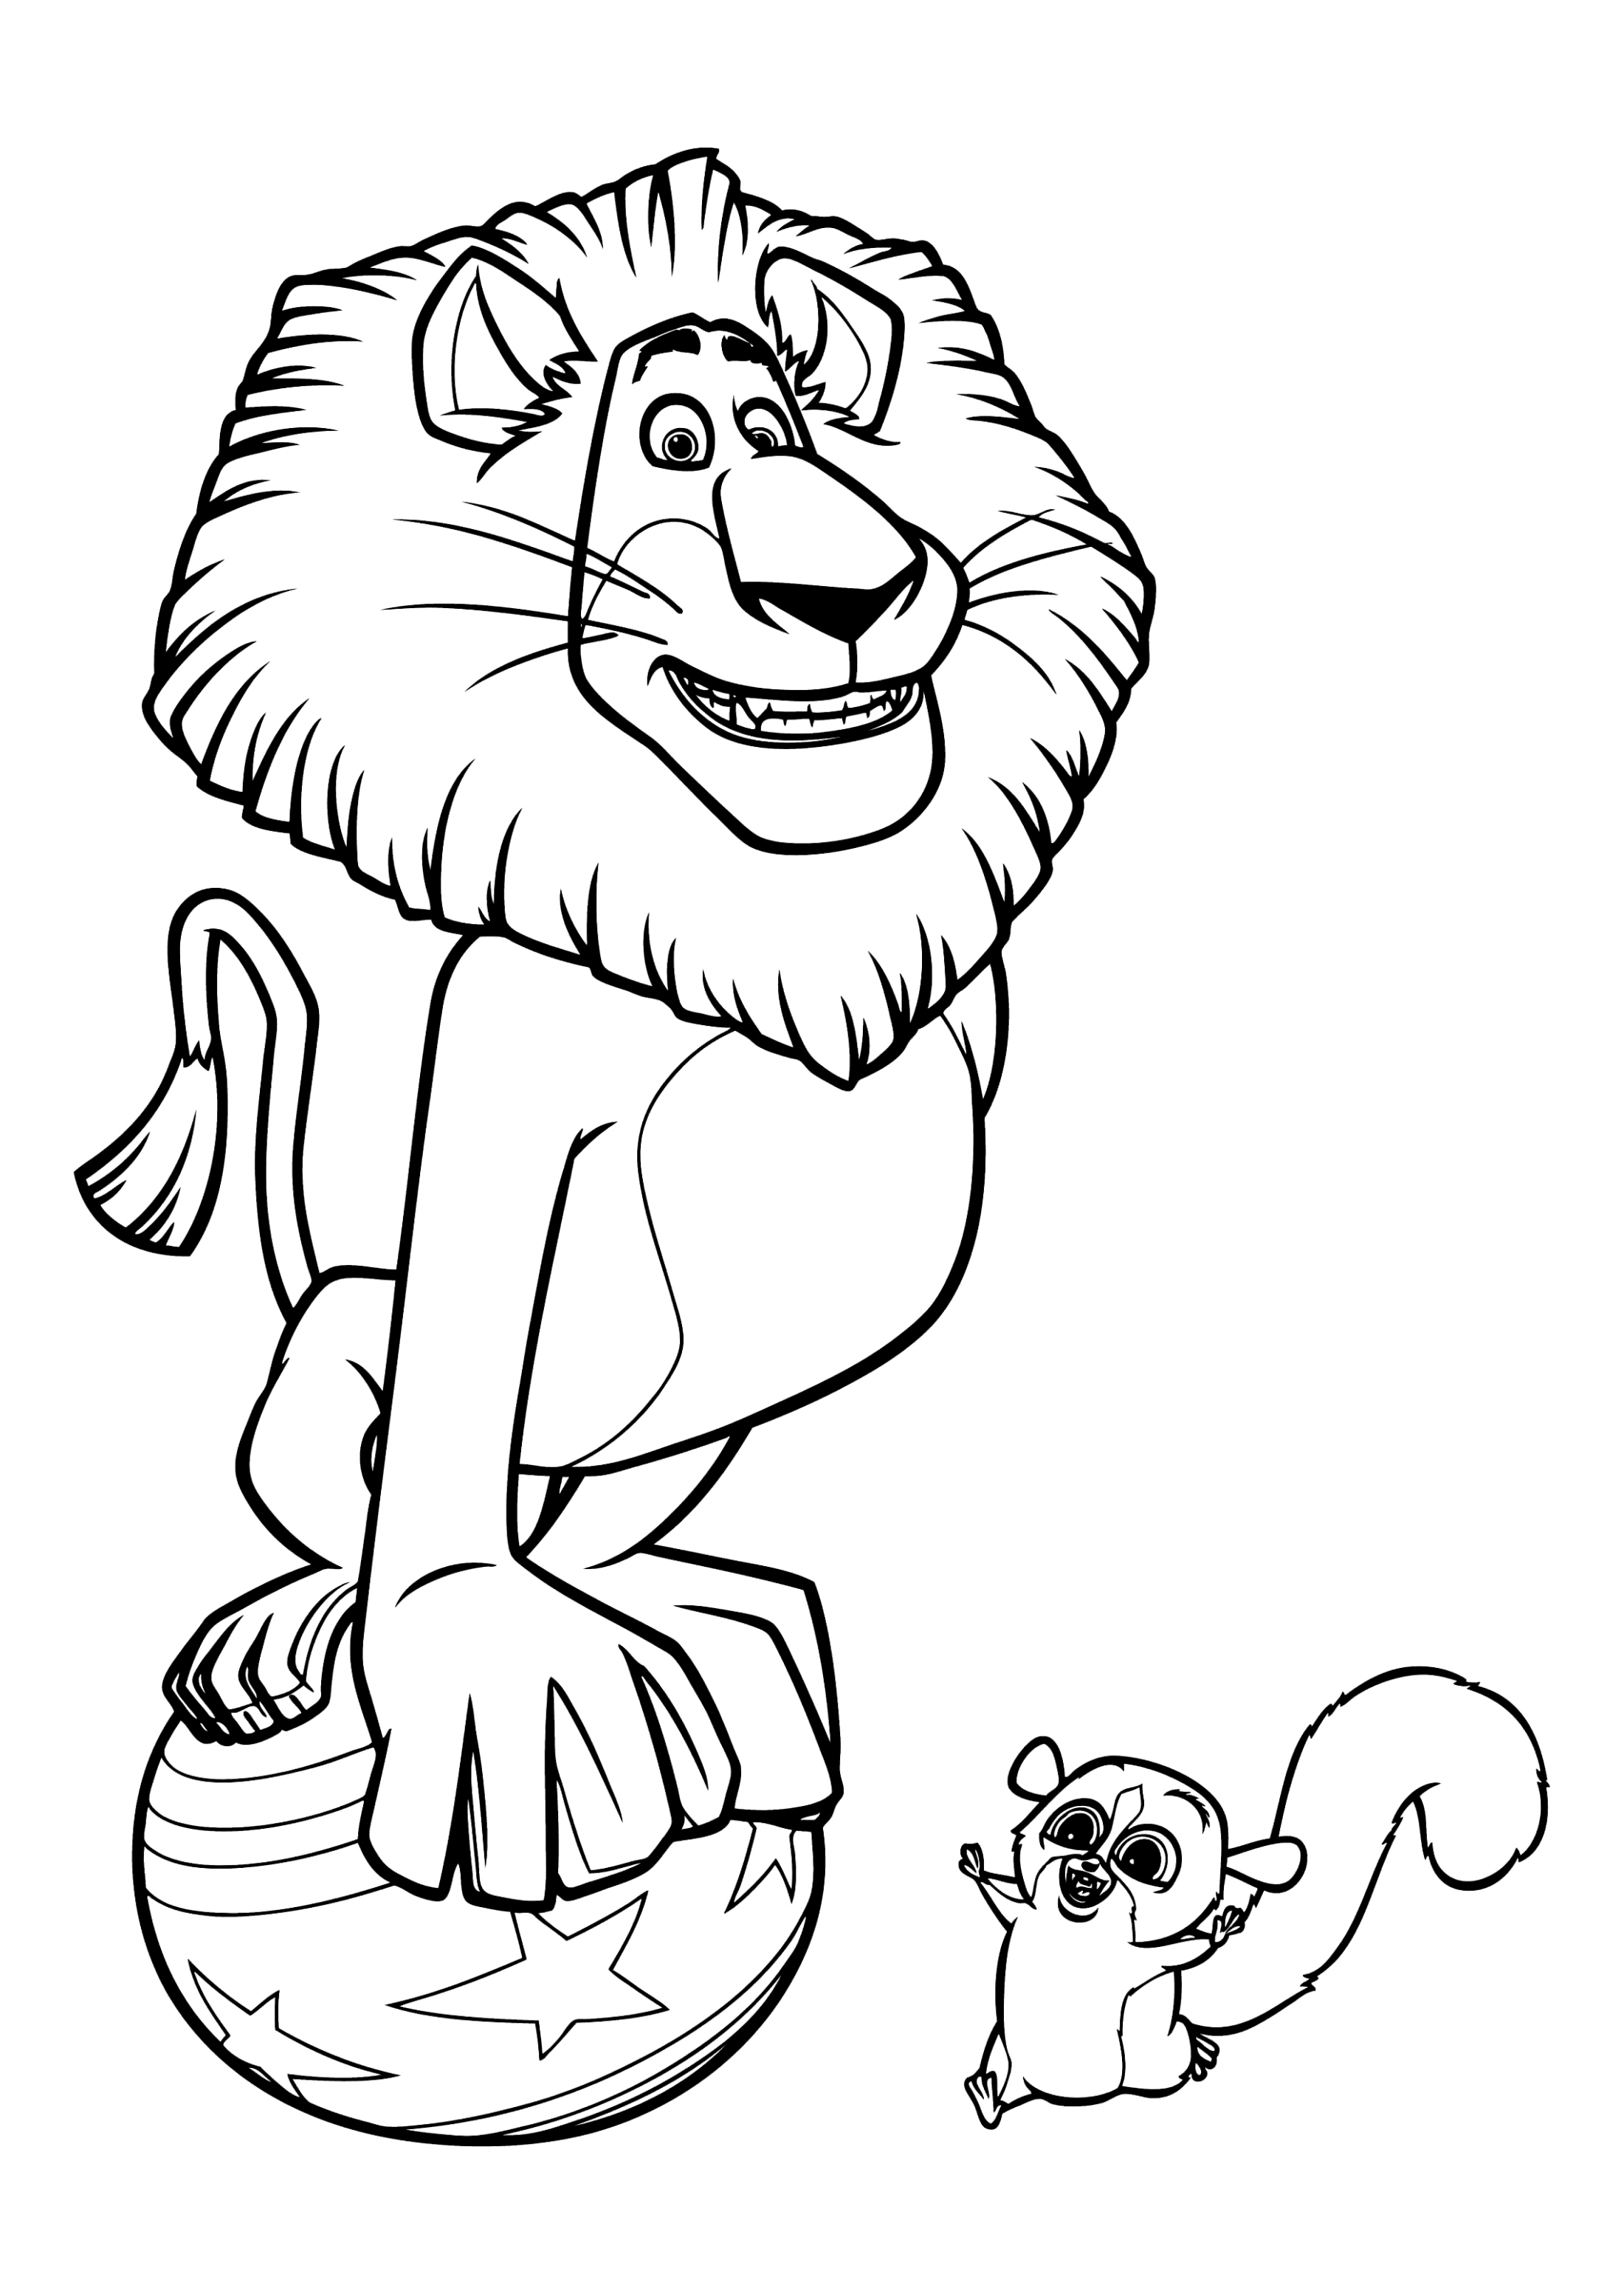 Coloring Pages from the cartoon Madagascar - Print